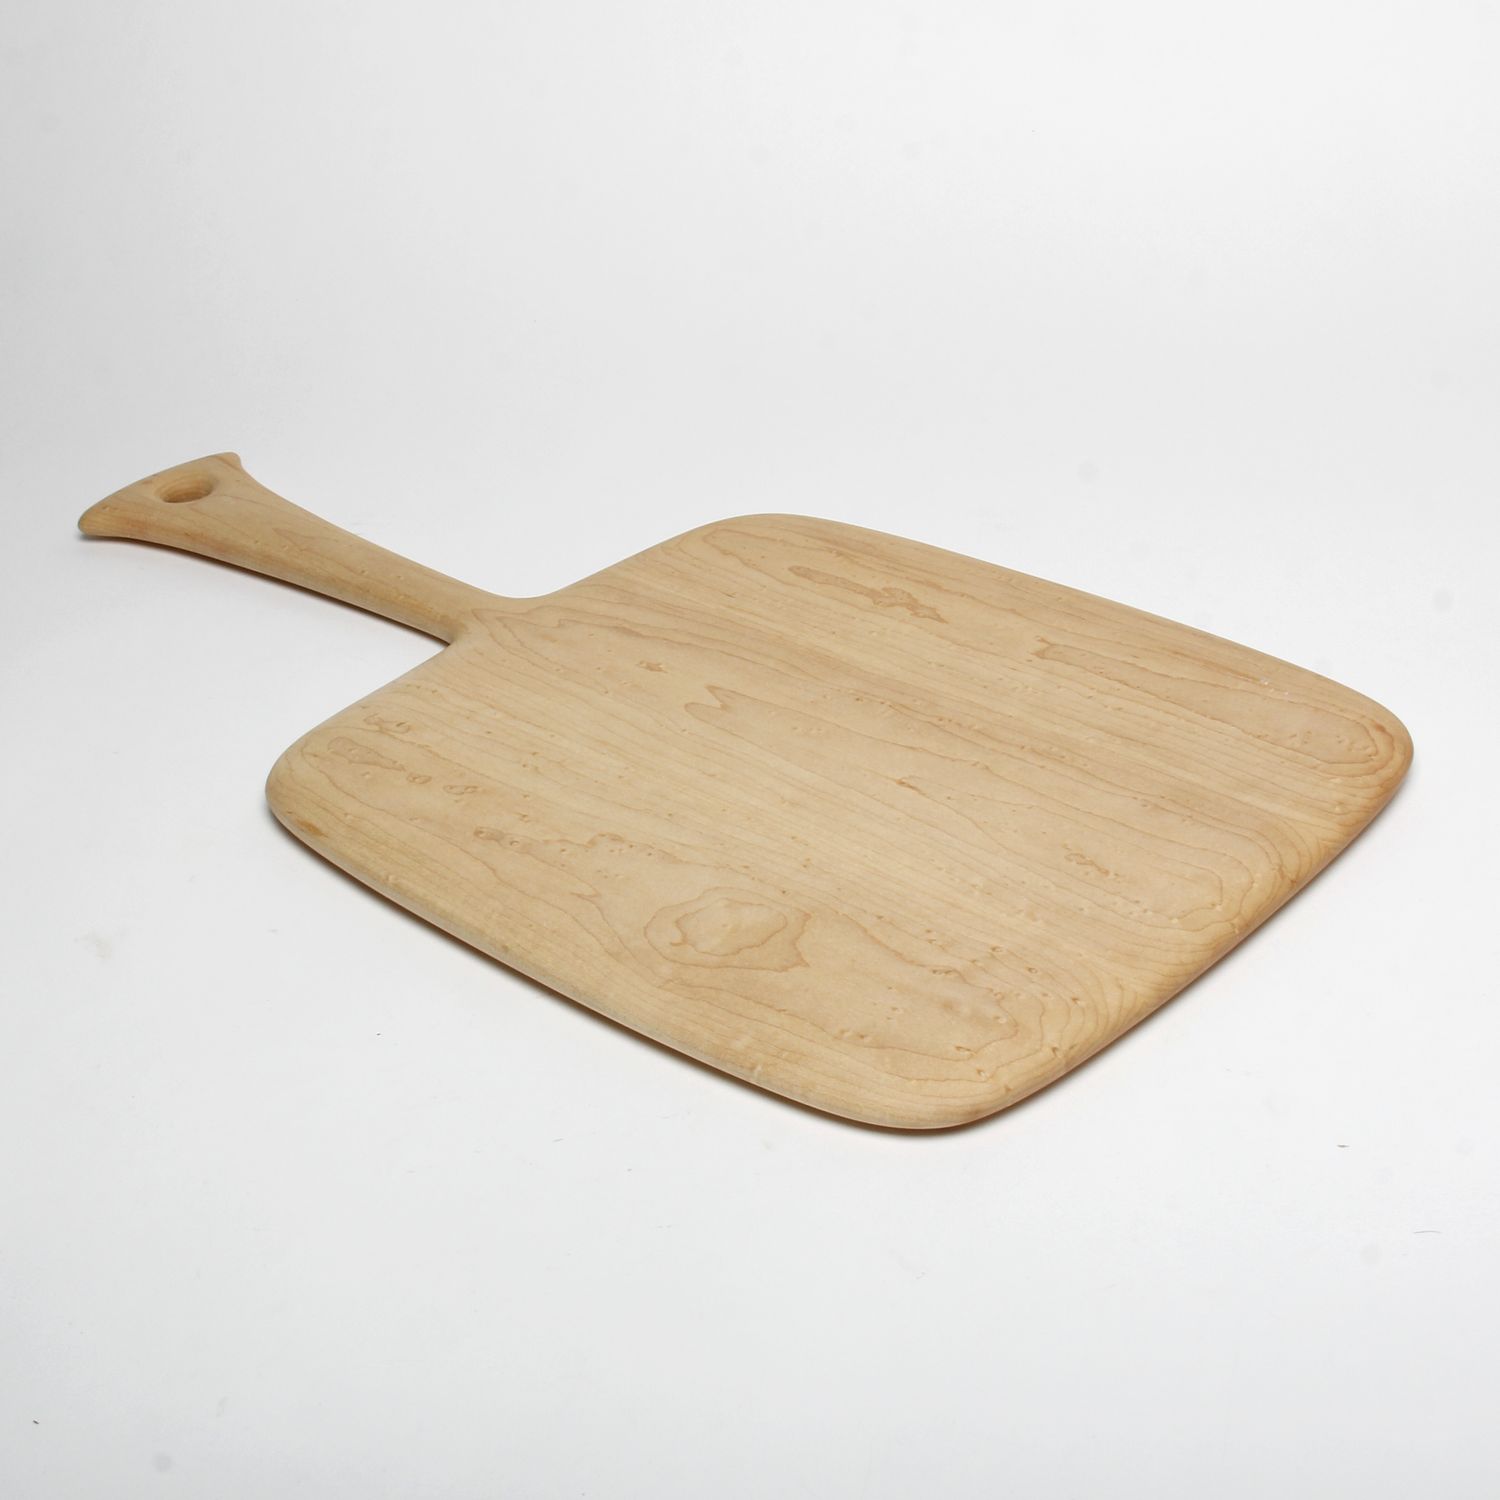 Edward S. Wohl: Breadboard Product Image 1 of 3